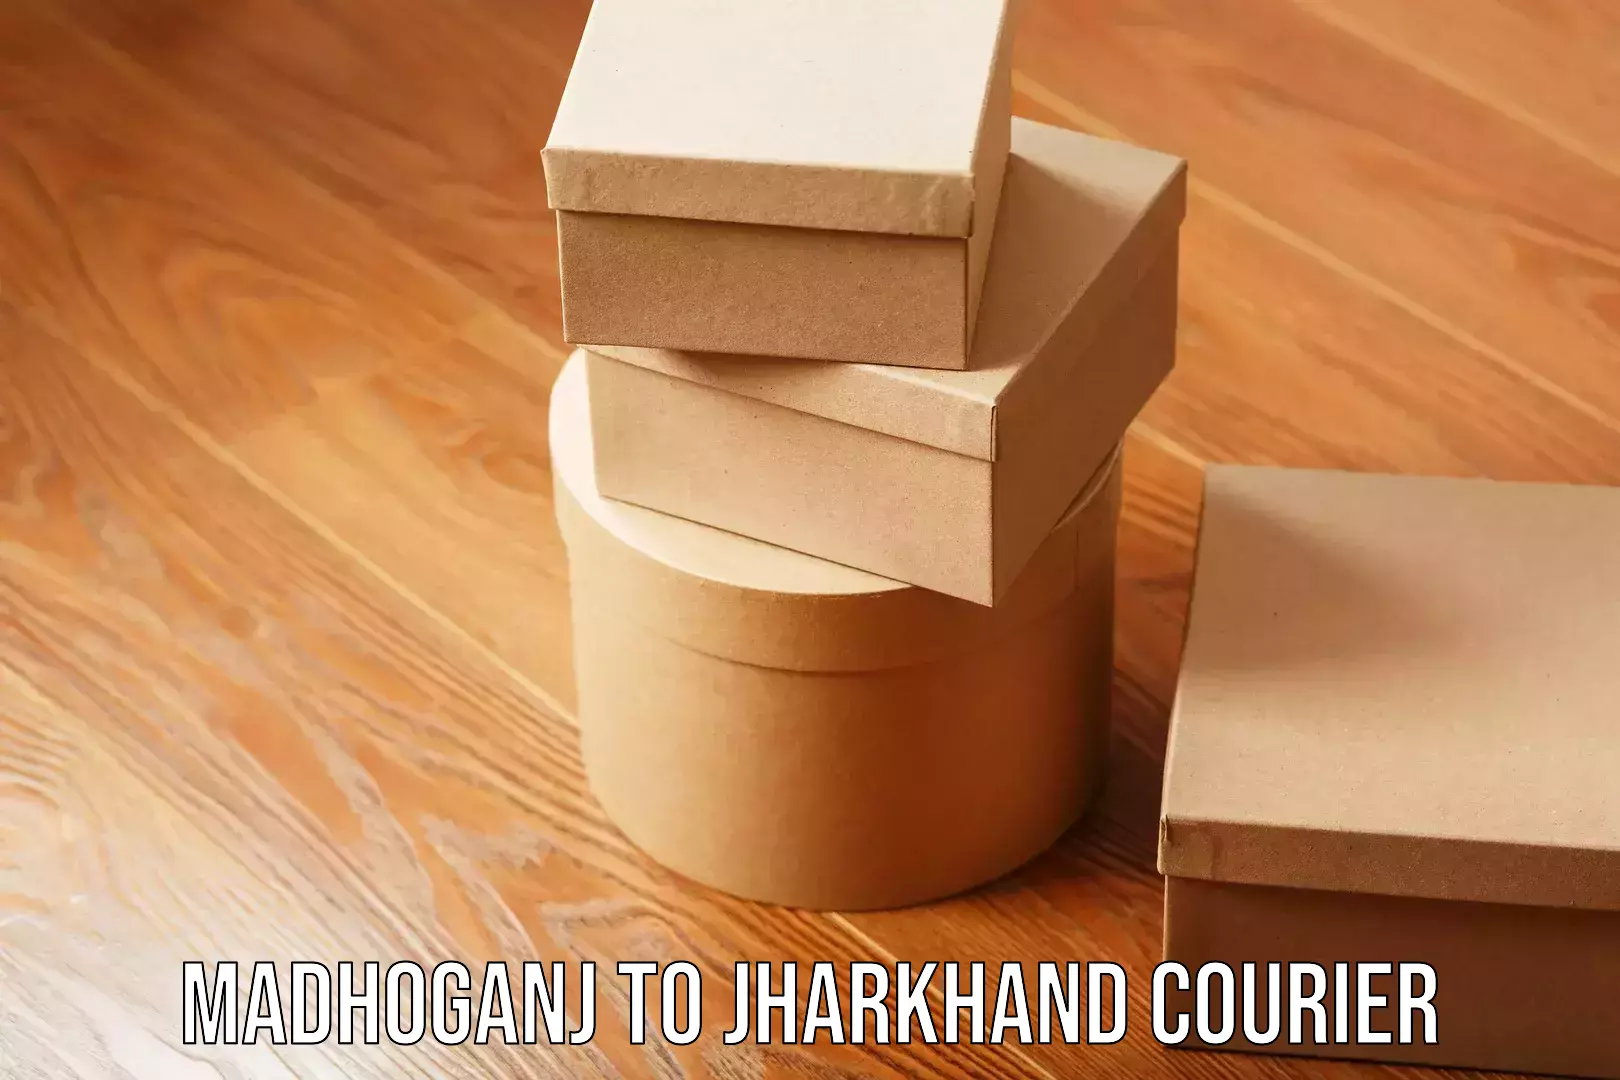 Comprehensive moving services in Madhoganj to Jharkhand